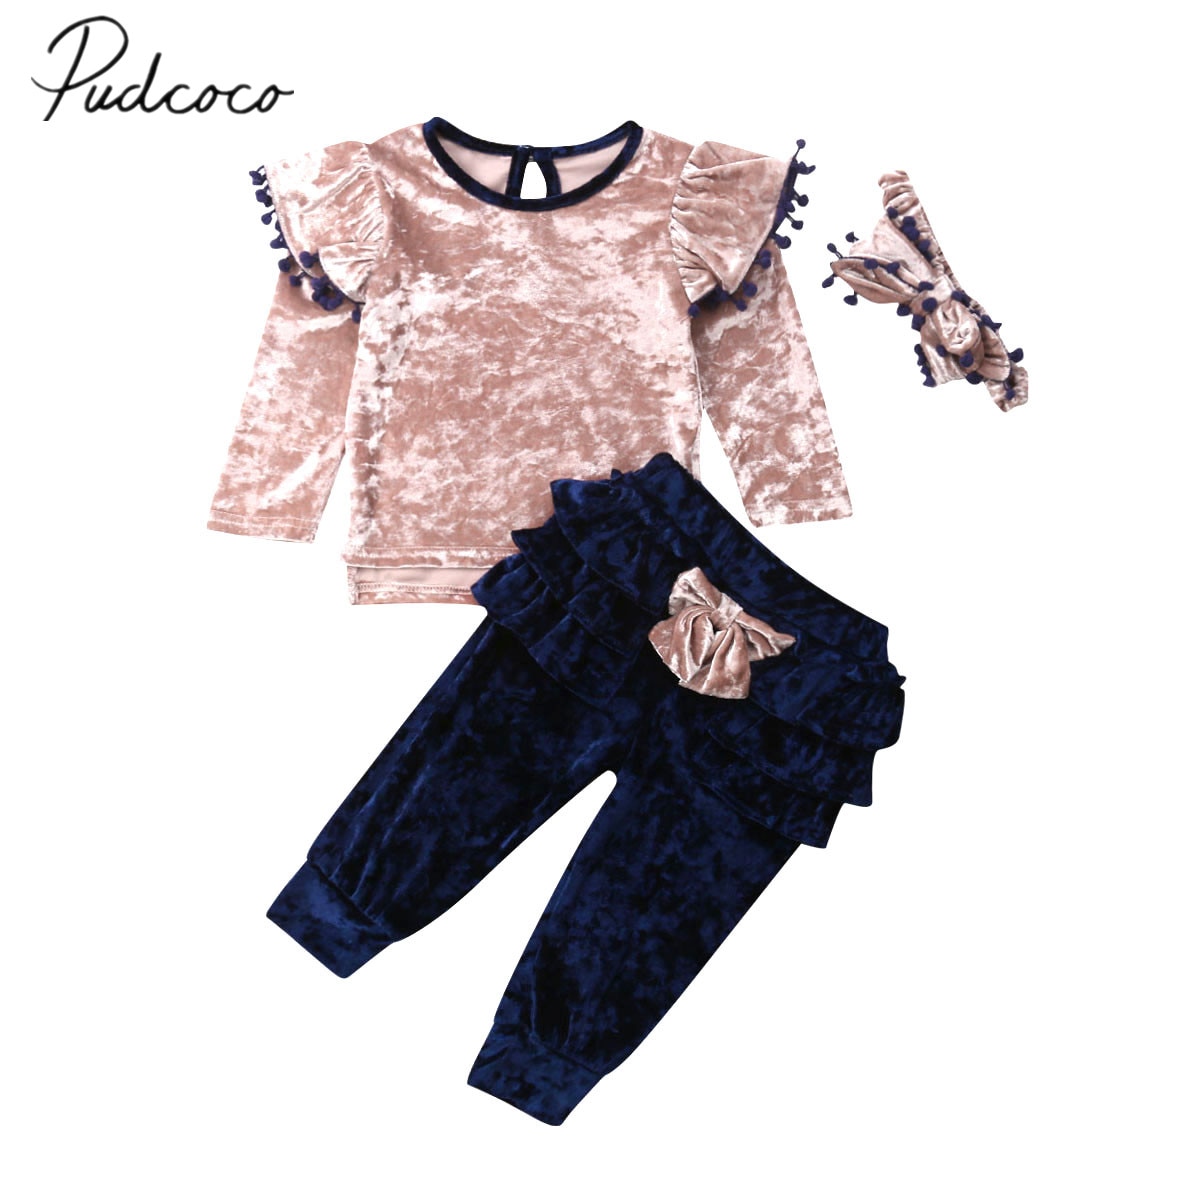 Baby Spring Fall Clothing Toddler Kids Baby Girl Clothes Velvet Ruffle Bow Tops Shirts Long Pants 3Pcs Outfit Set 1-6Y